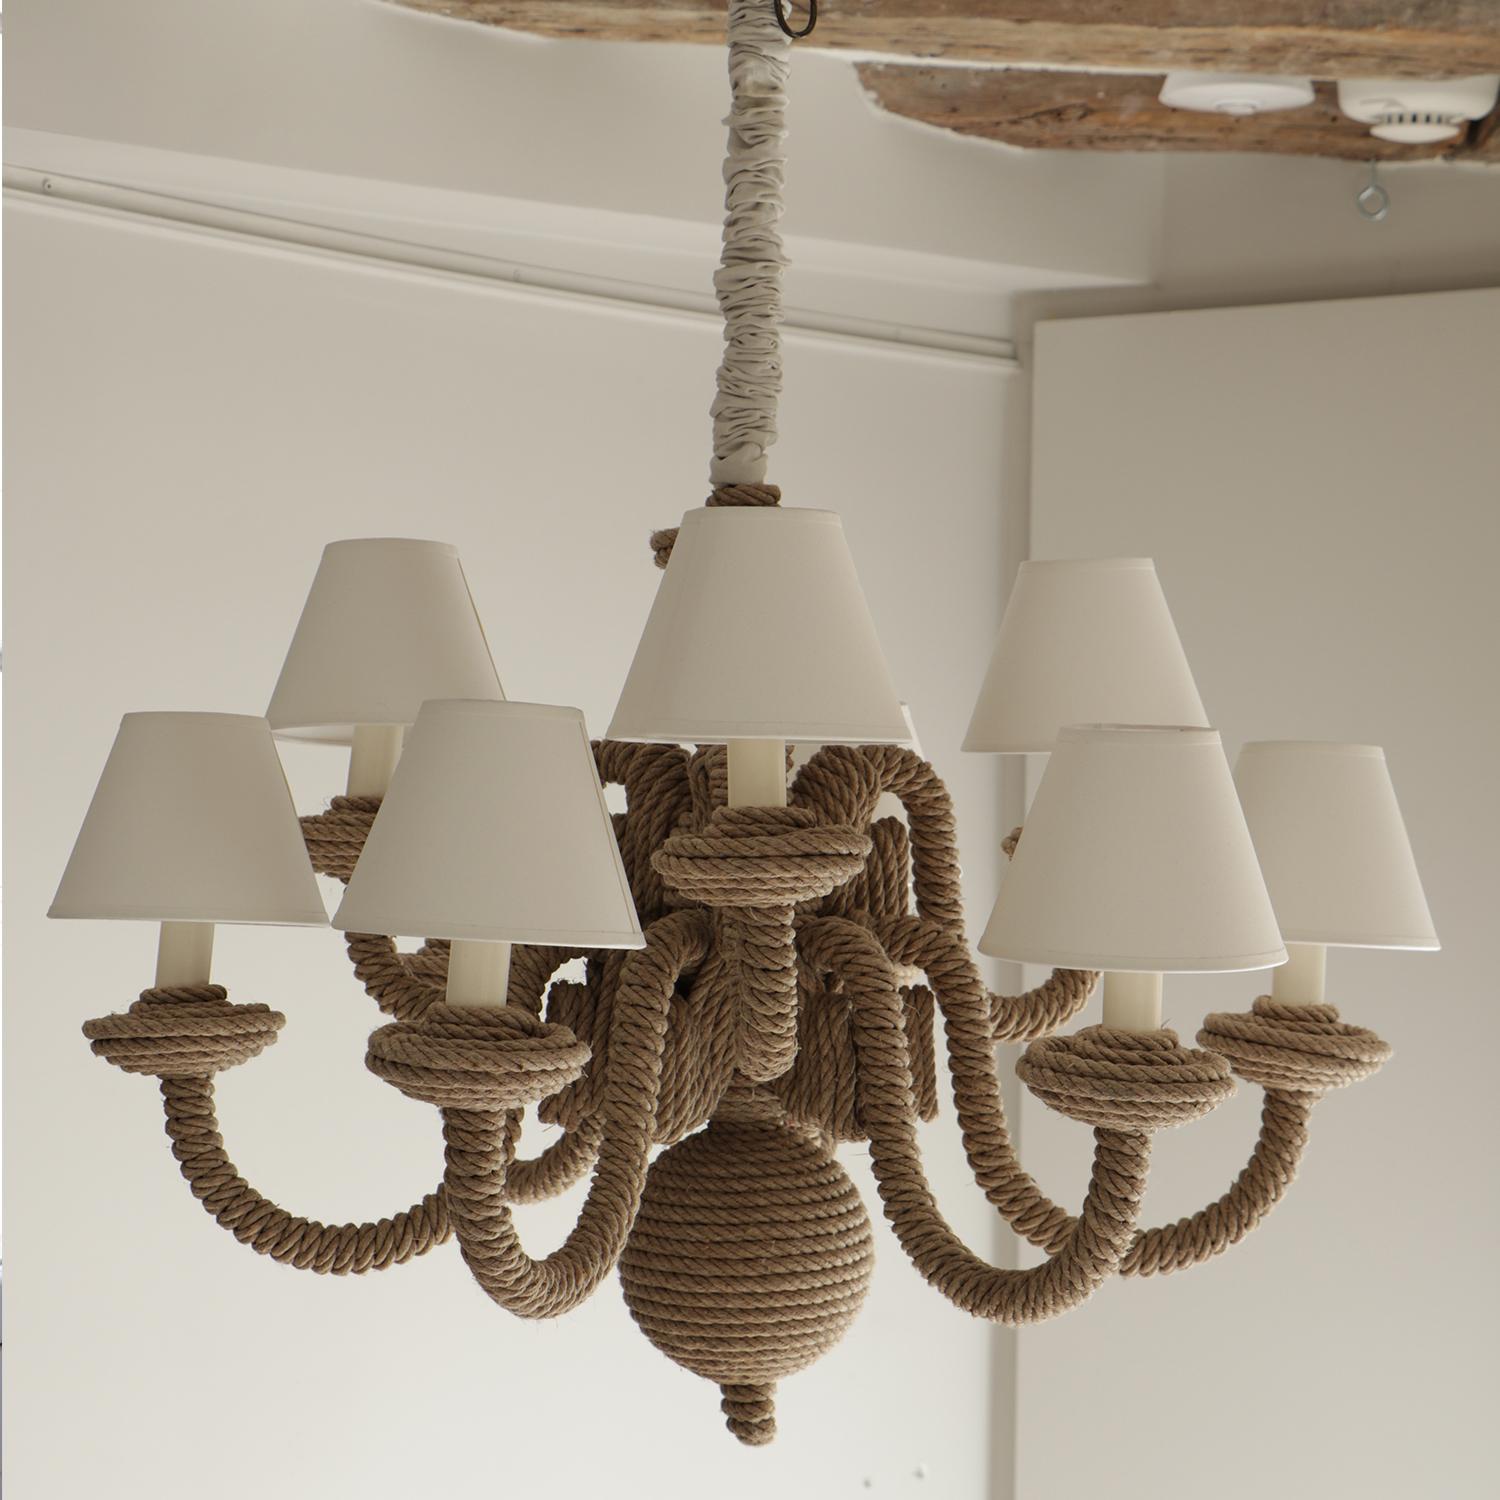 This nine-branched chandelier by Christian Astuguevieille is made of hemp rope covering a bronze structure. It is a unique model.

Christian Astuguevieille is a versatile artist, designer and creator. He experiments with textures, shapes and lines.